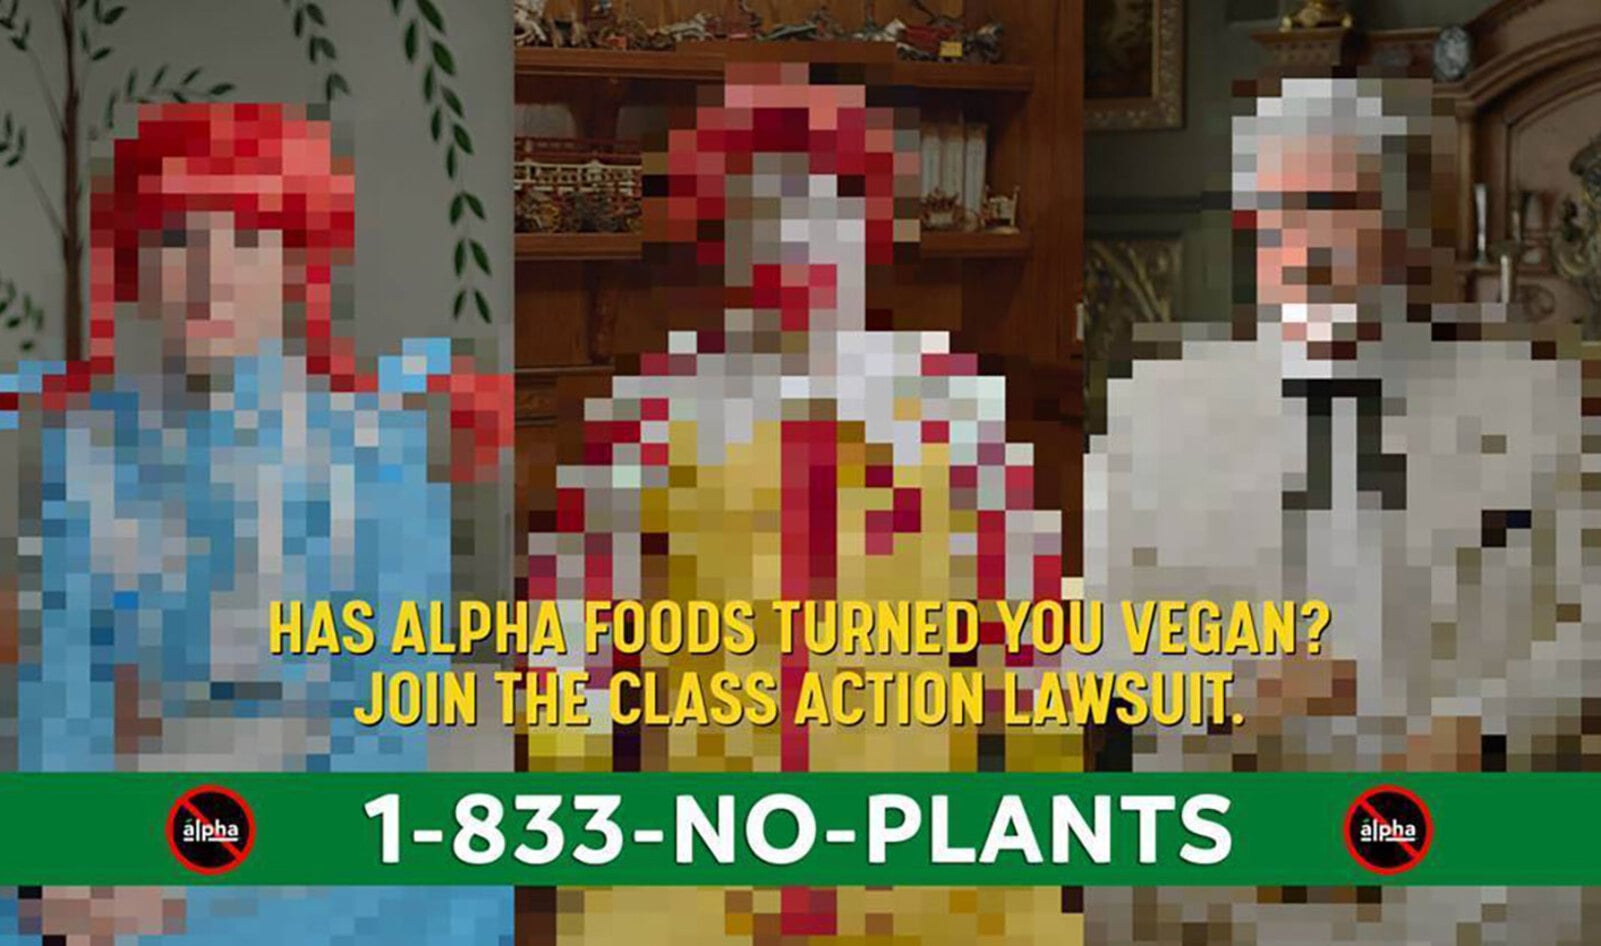 Colonel Sanders, Ronald McDonald, and Wendy Are “Suing” Alpha Foods for Turning Them Vegan